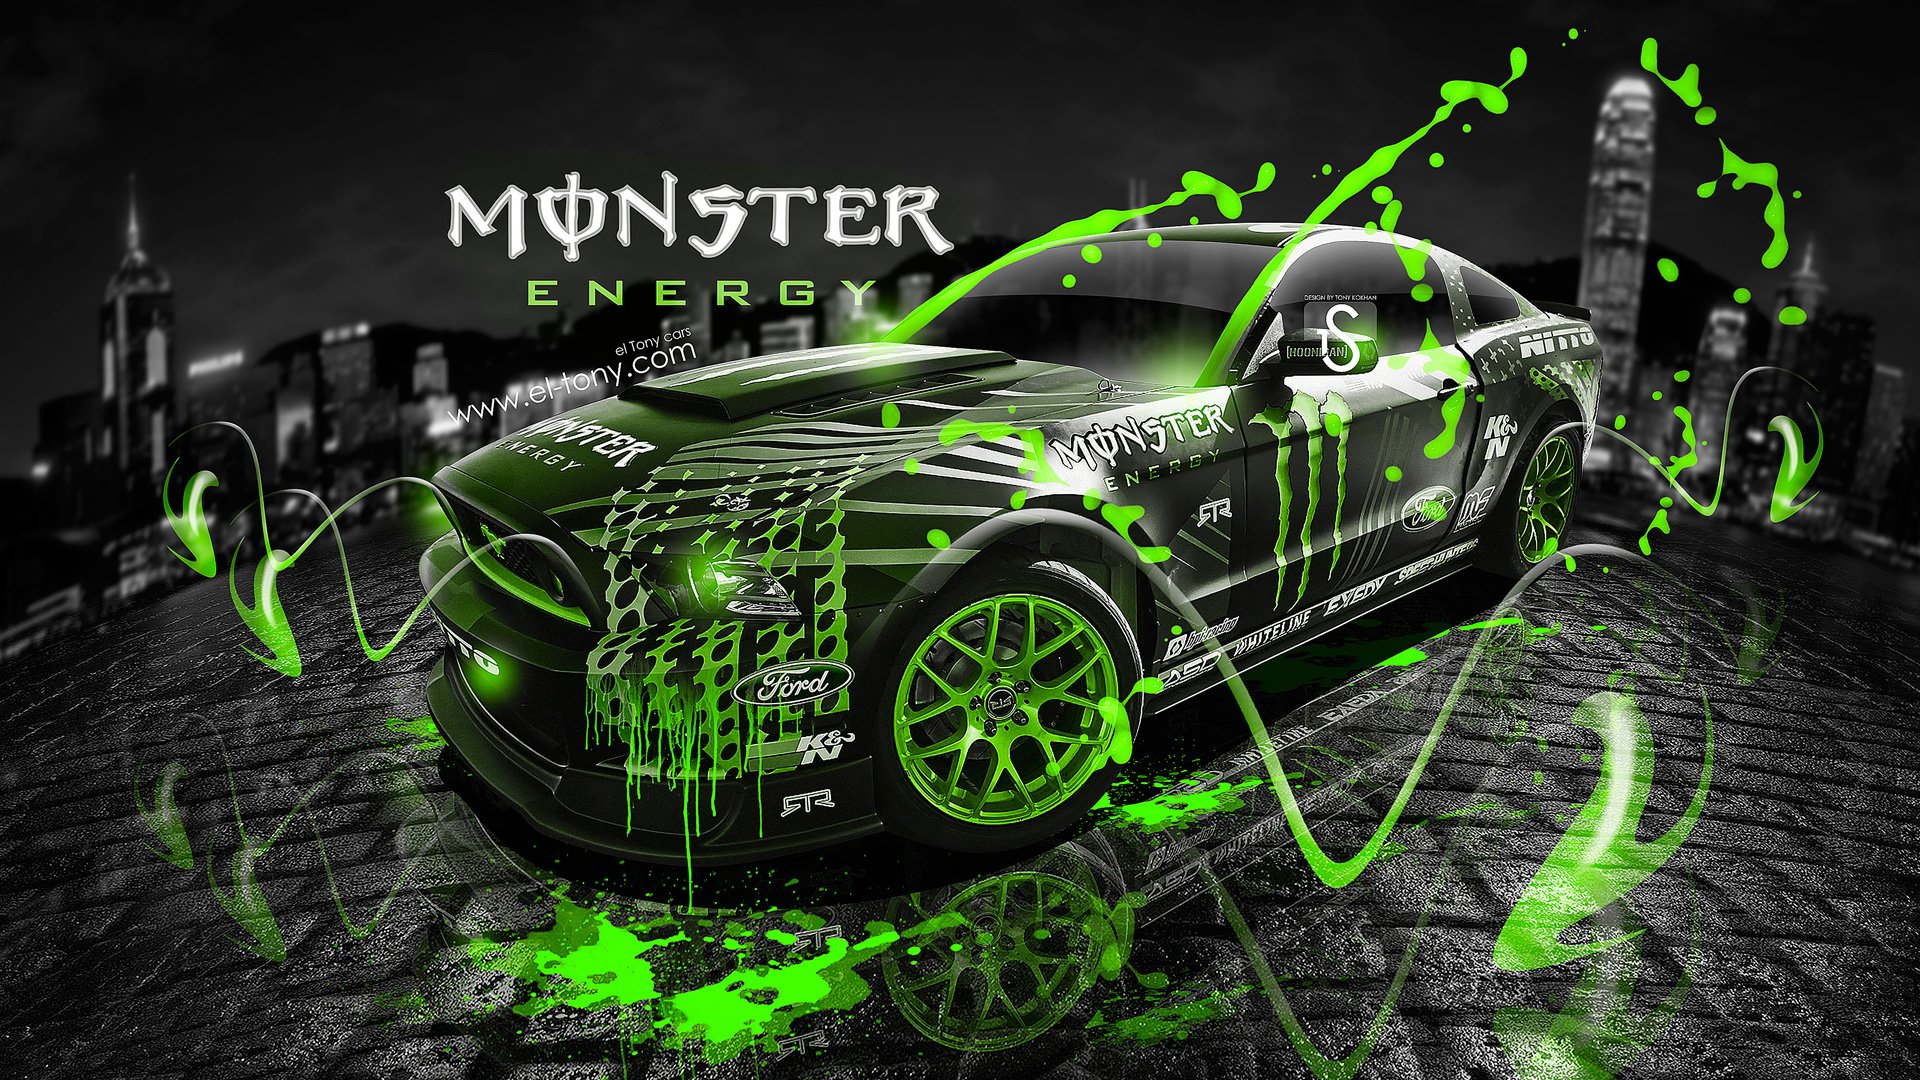 ford, Mustang, Rtr, Monster, Energy, Drift, Race, Racing Wallpapers HD /  Desktop and Mobile Backgrounds